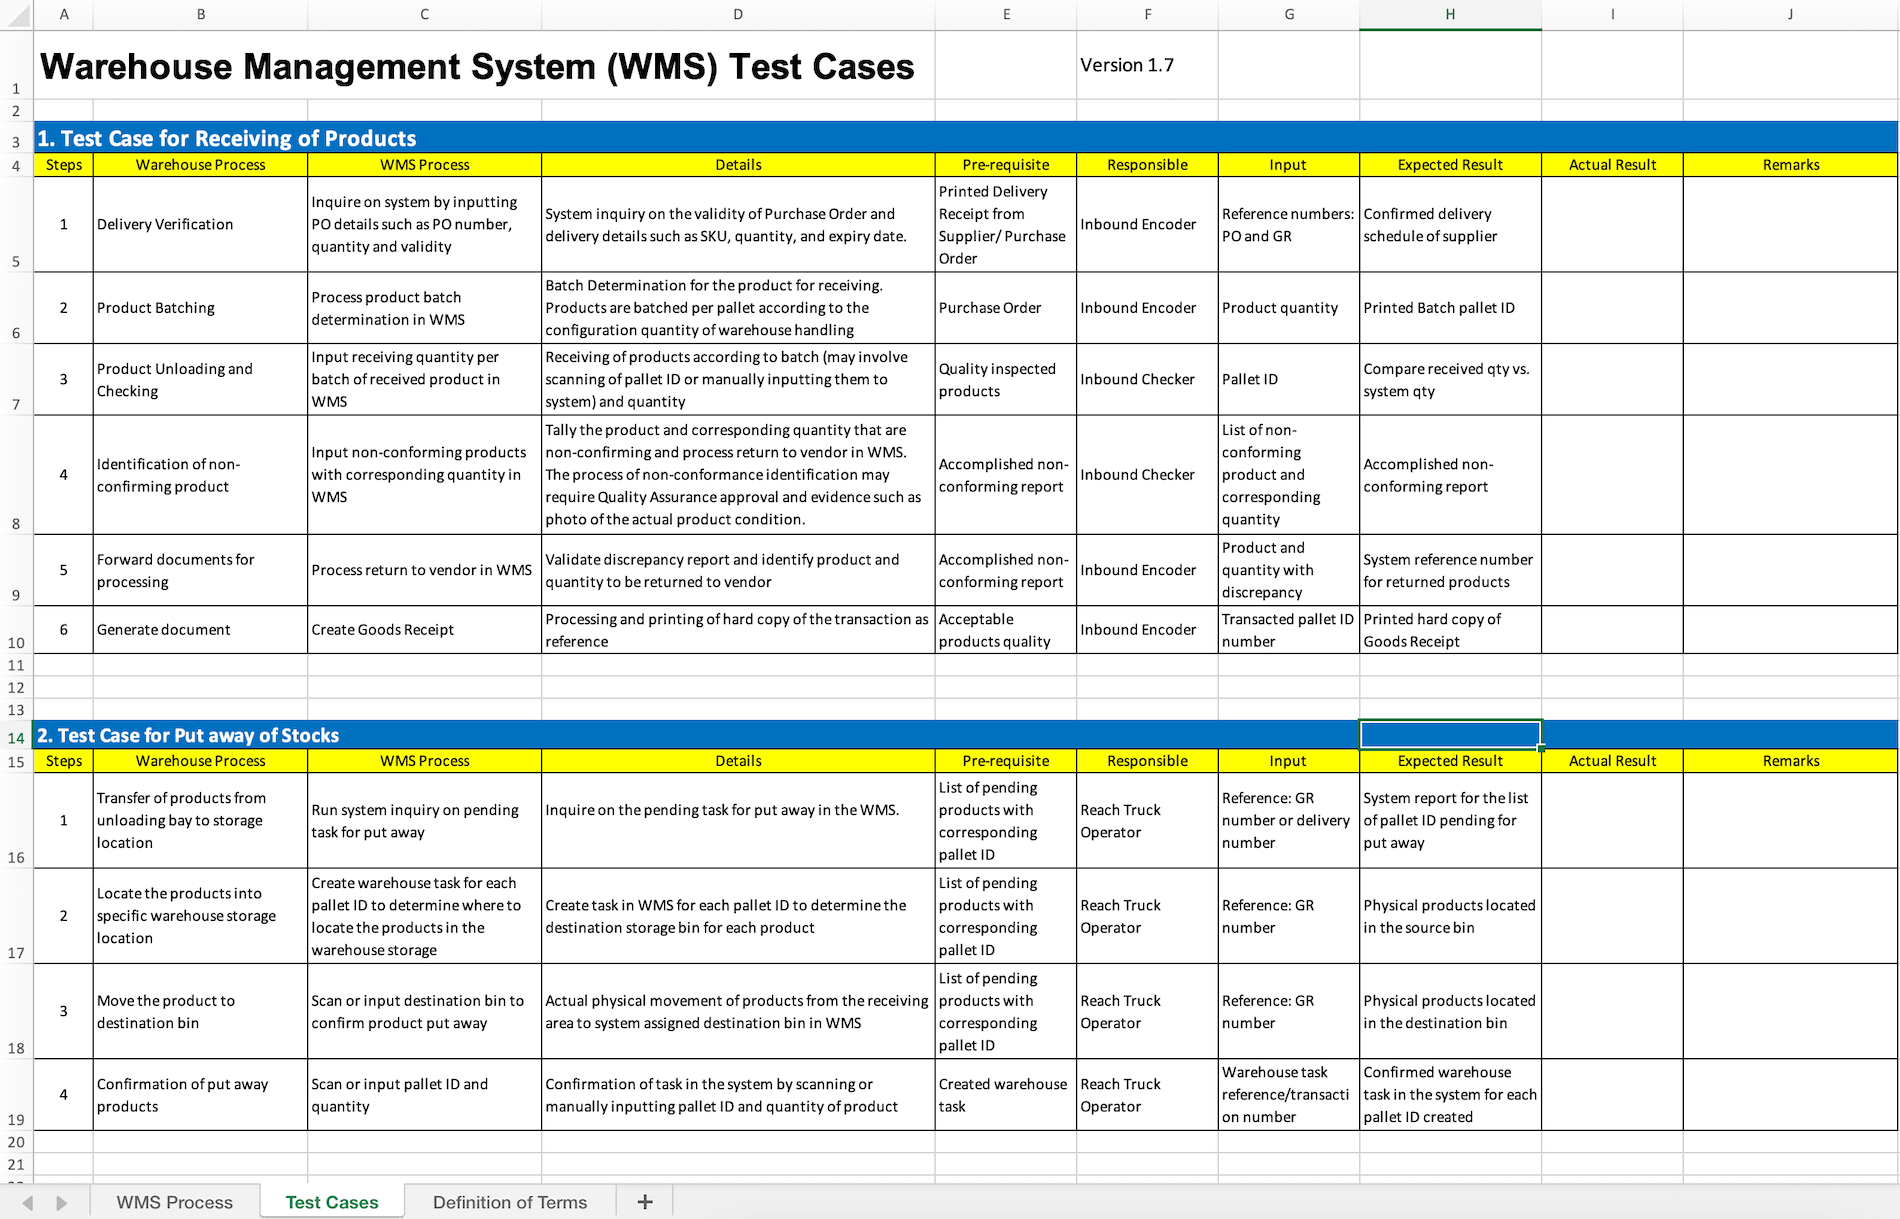 Image showing the warehouse management system test cases included in the Excel file. The file can be downloaded on this page.